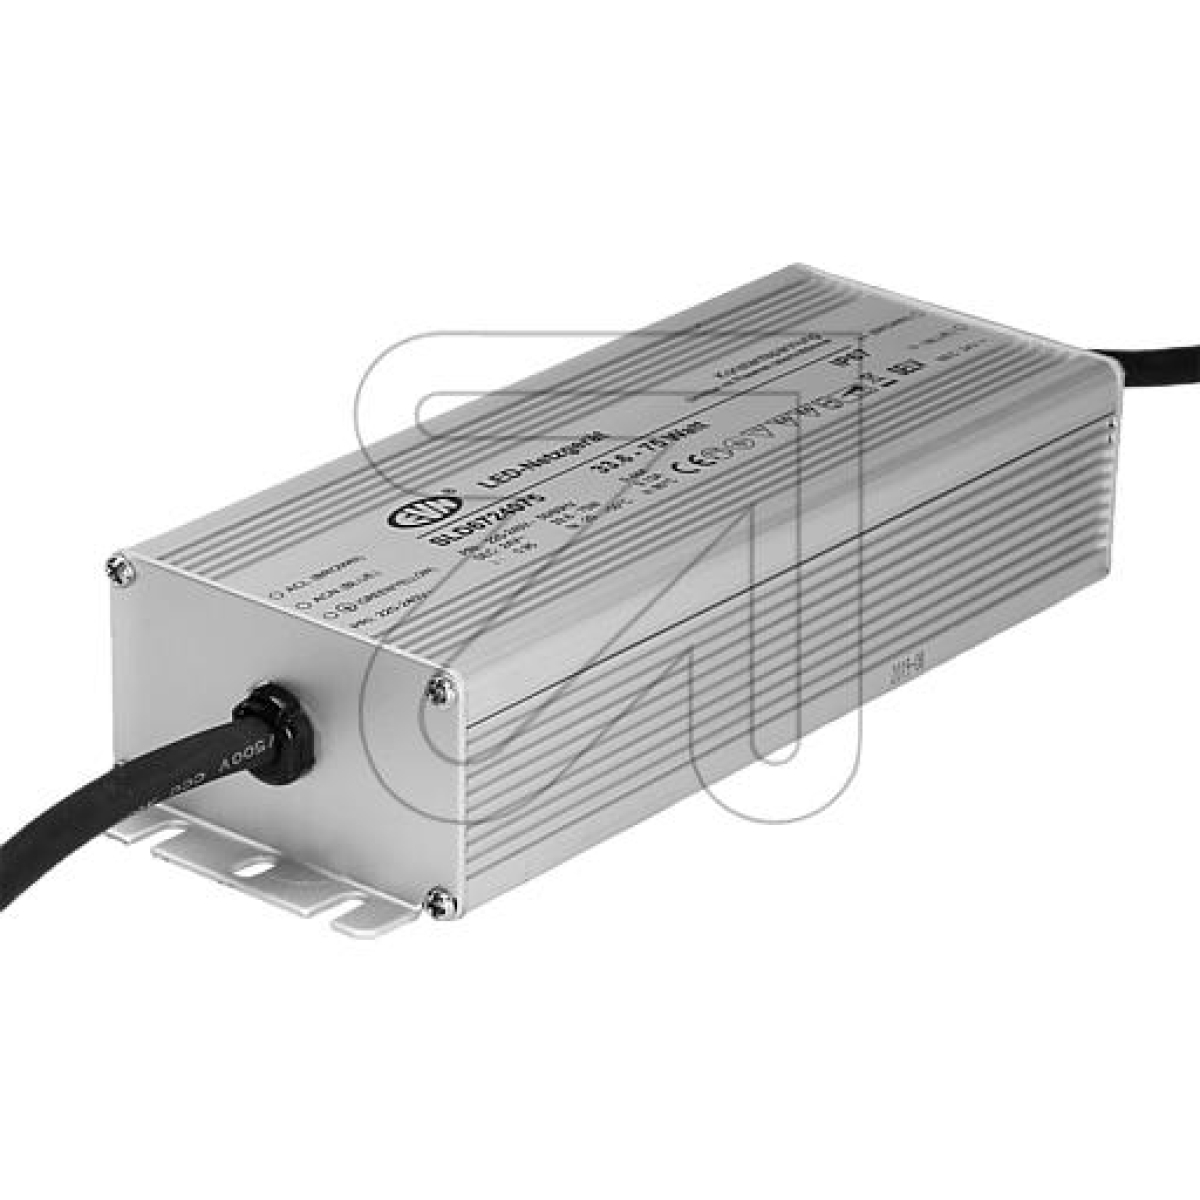 EVNLED power pack IP67 24V/DC 75W dimmable SLD6724075Article-No: 627765